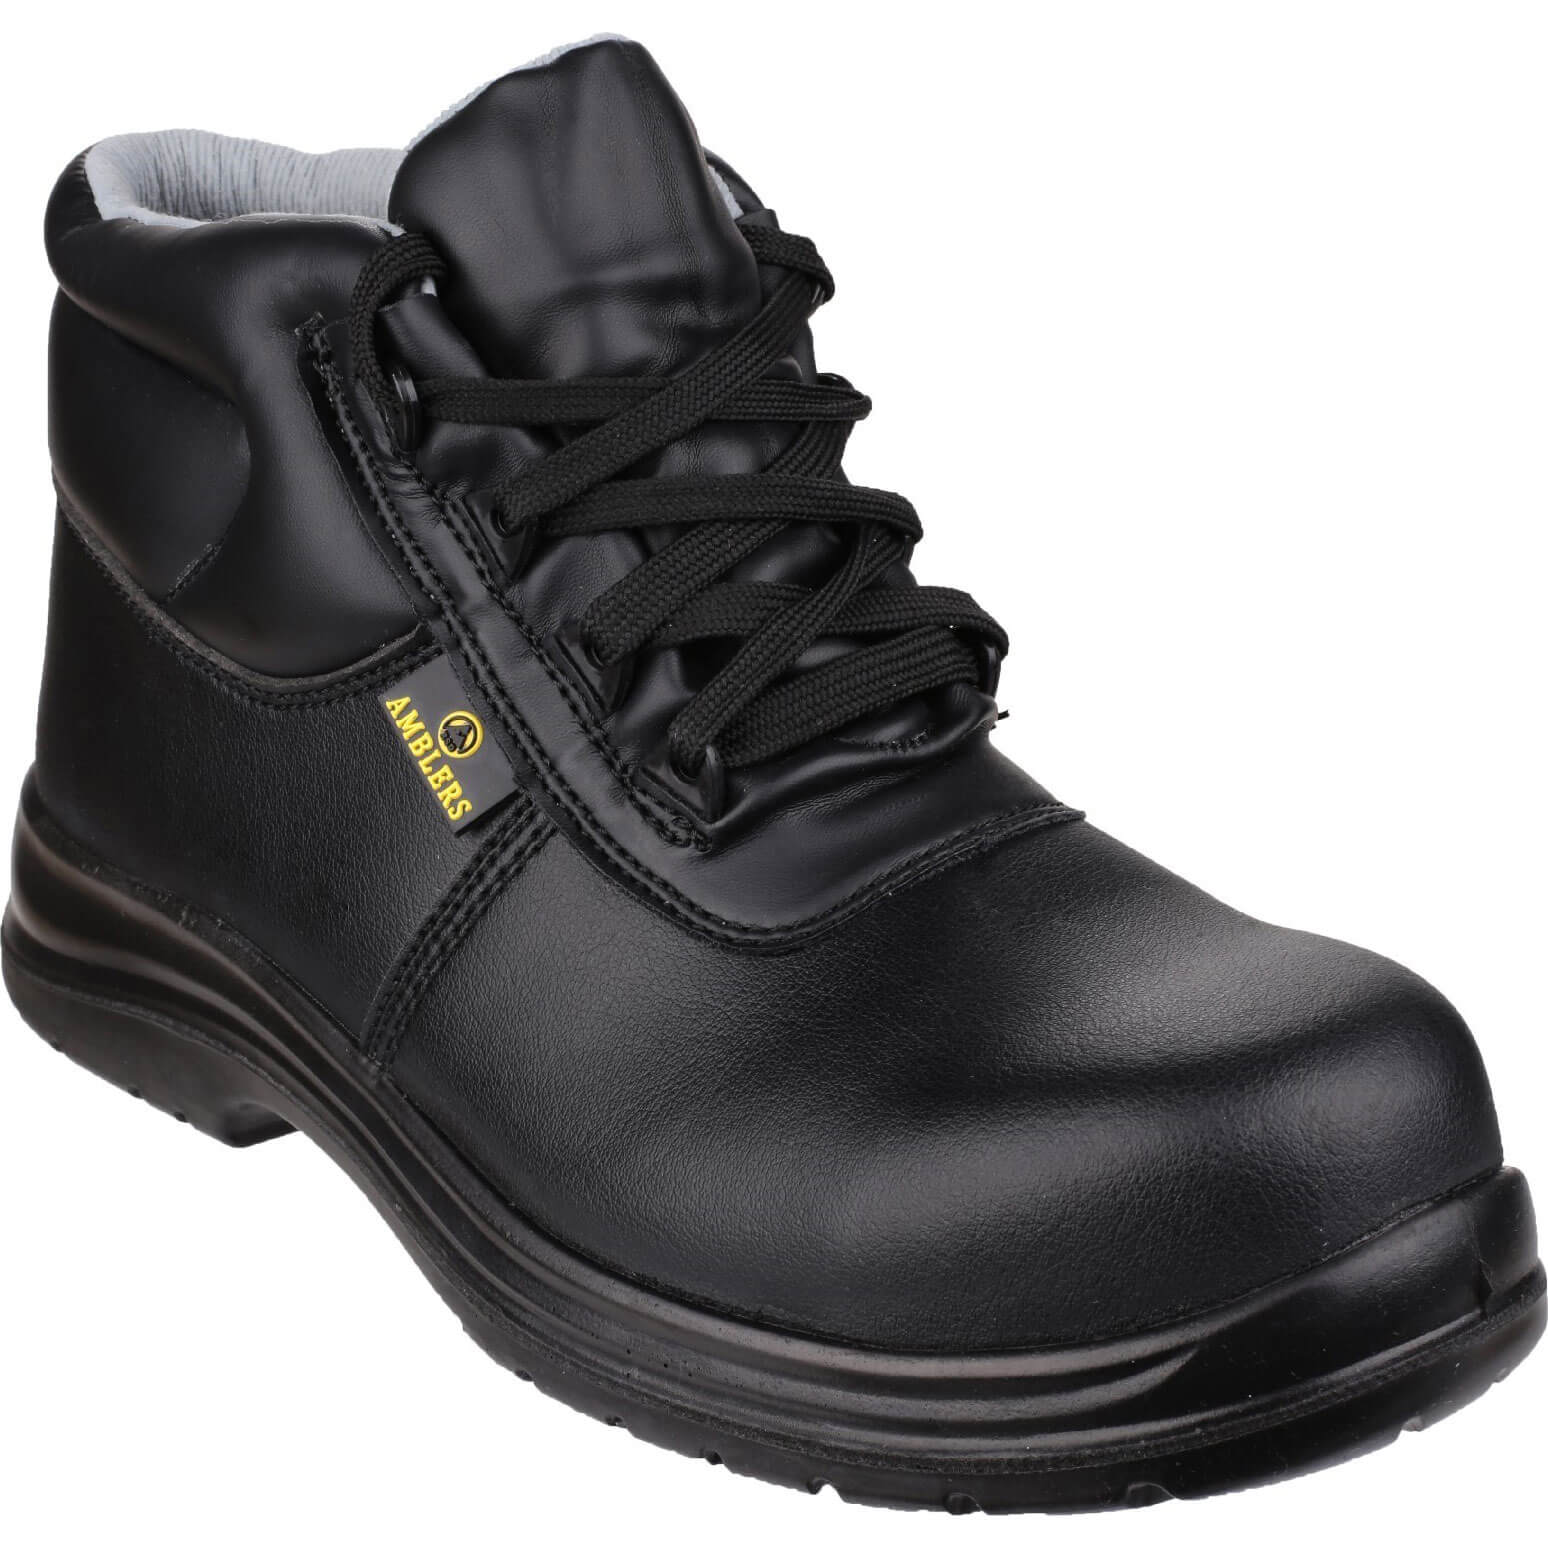 Photo of Amblers Mens Safety Fs663 Metal-free Water-resistant Safety Boots Black Size 7